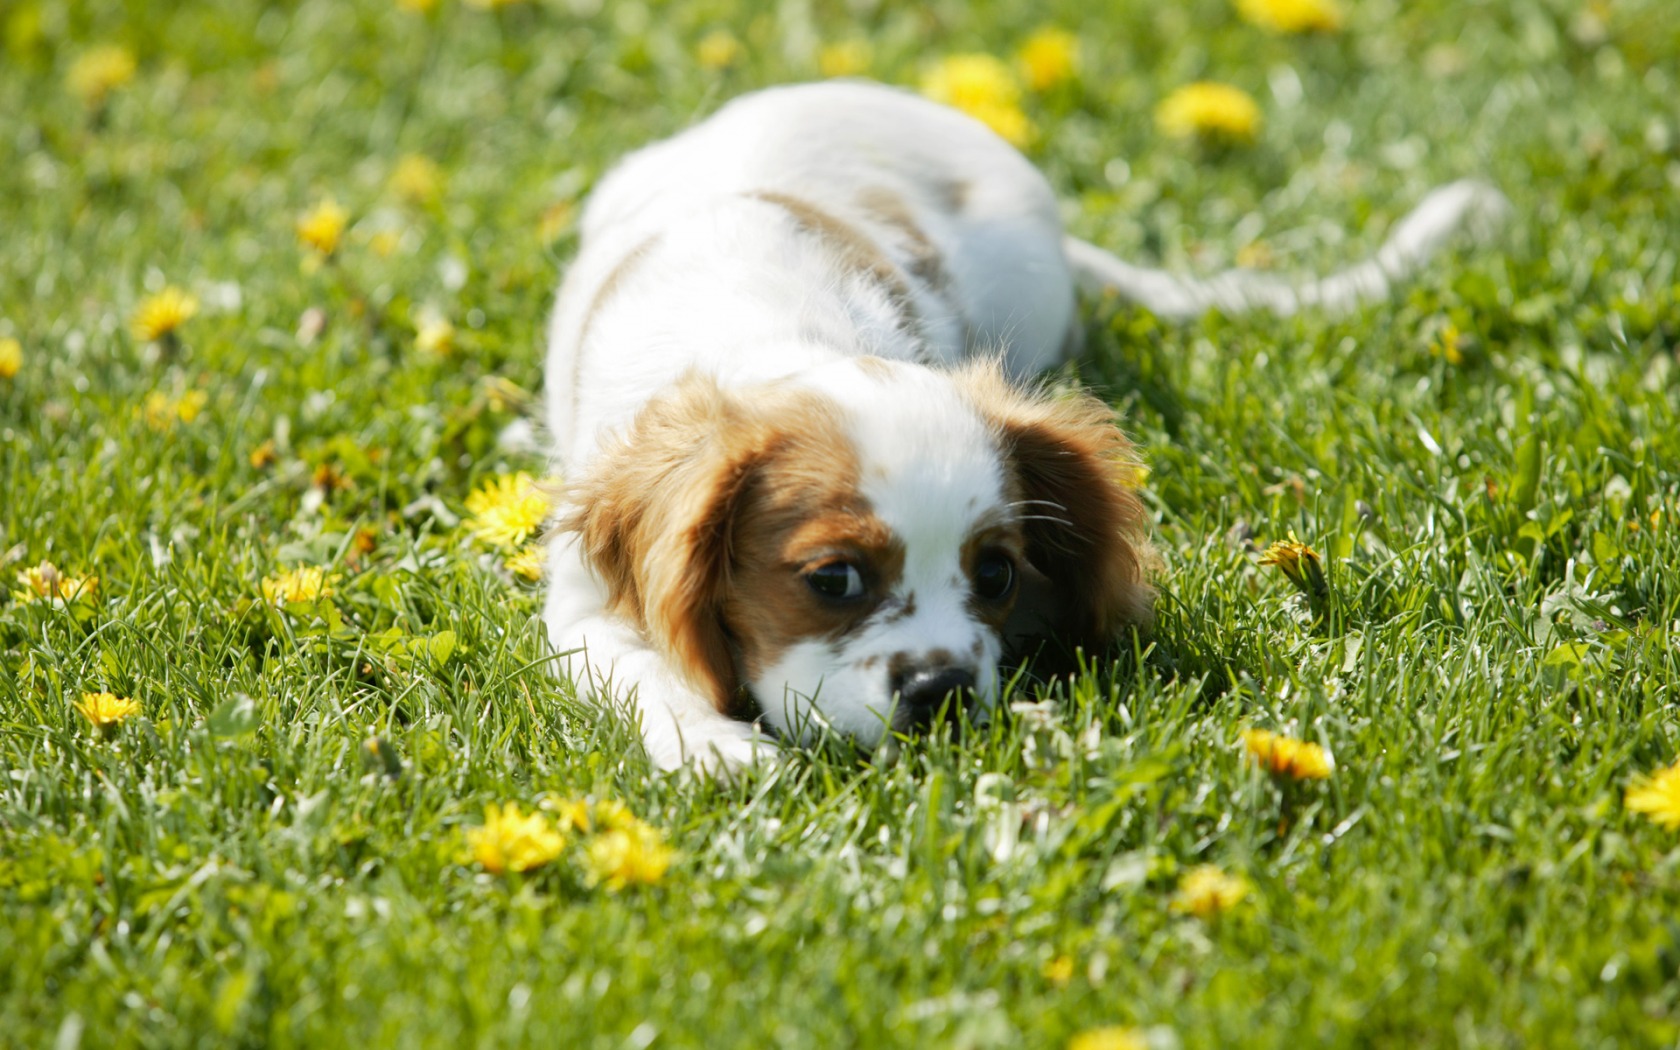 Small Dog Wallpaper Dogs Animals In Jpg Format For